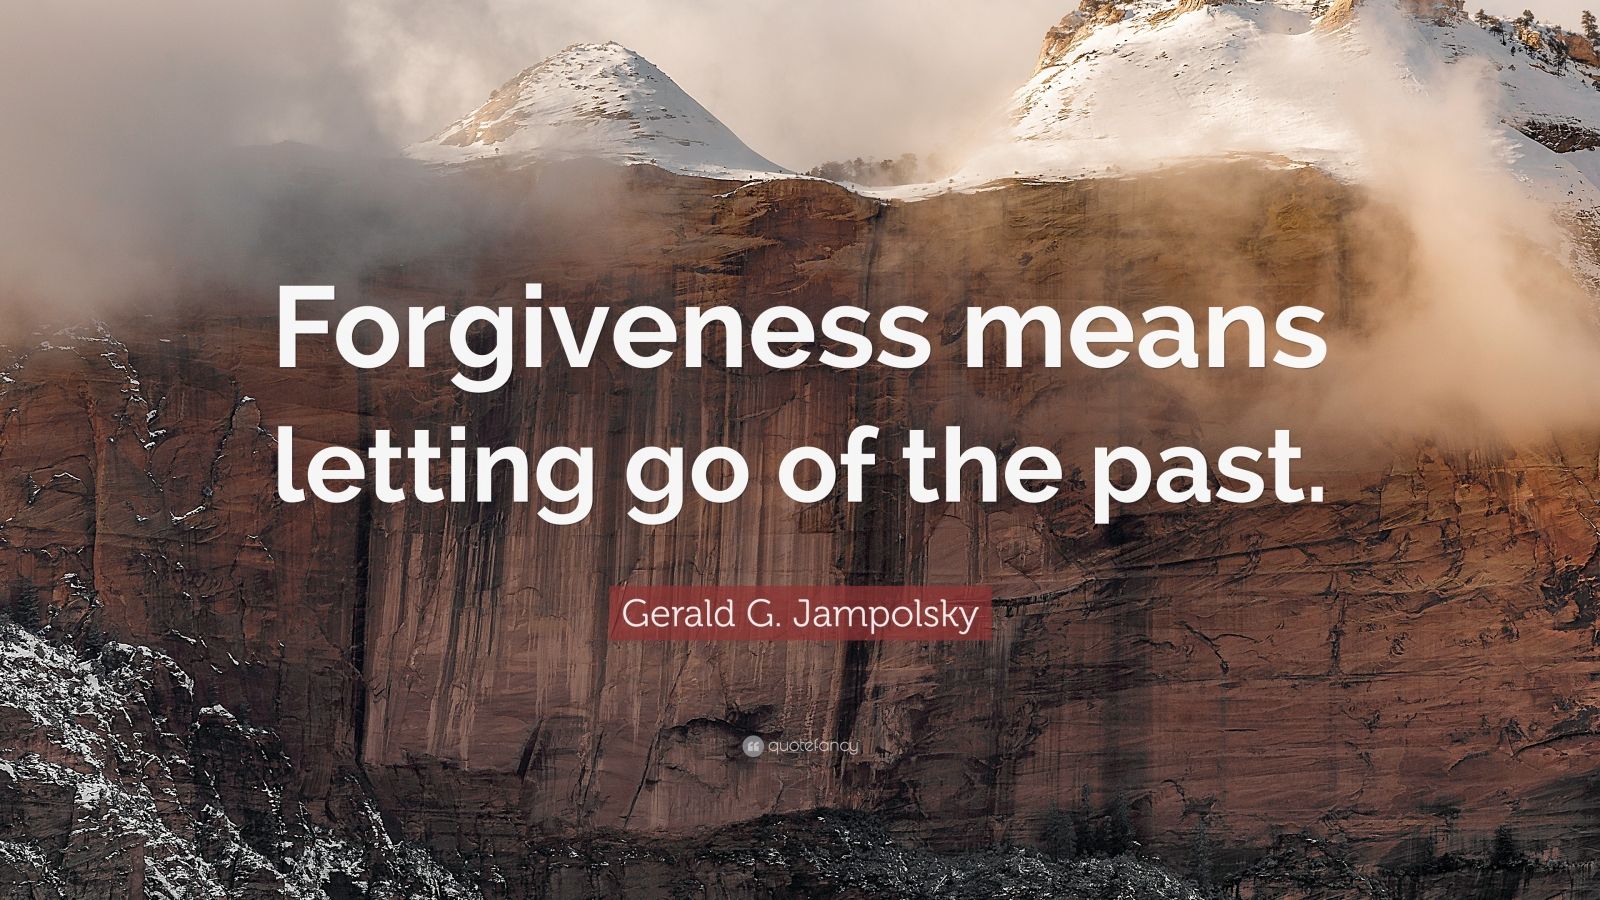 5264040 Gerald G Jampolsky Quote Forgiveness Means Letting Go Of The Past 